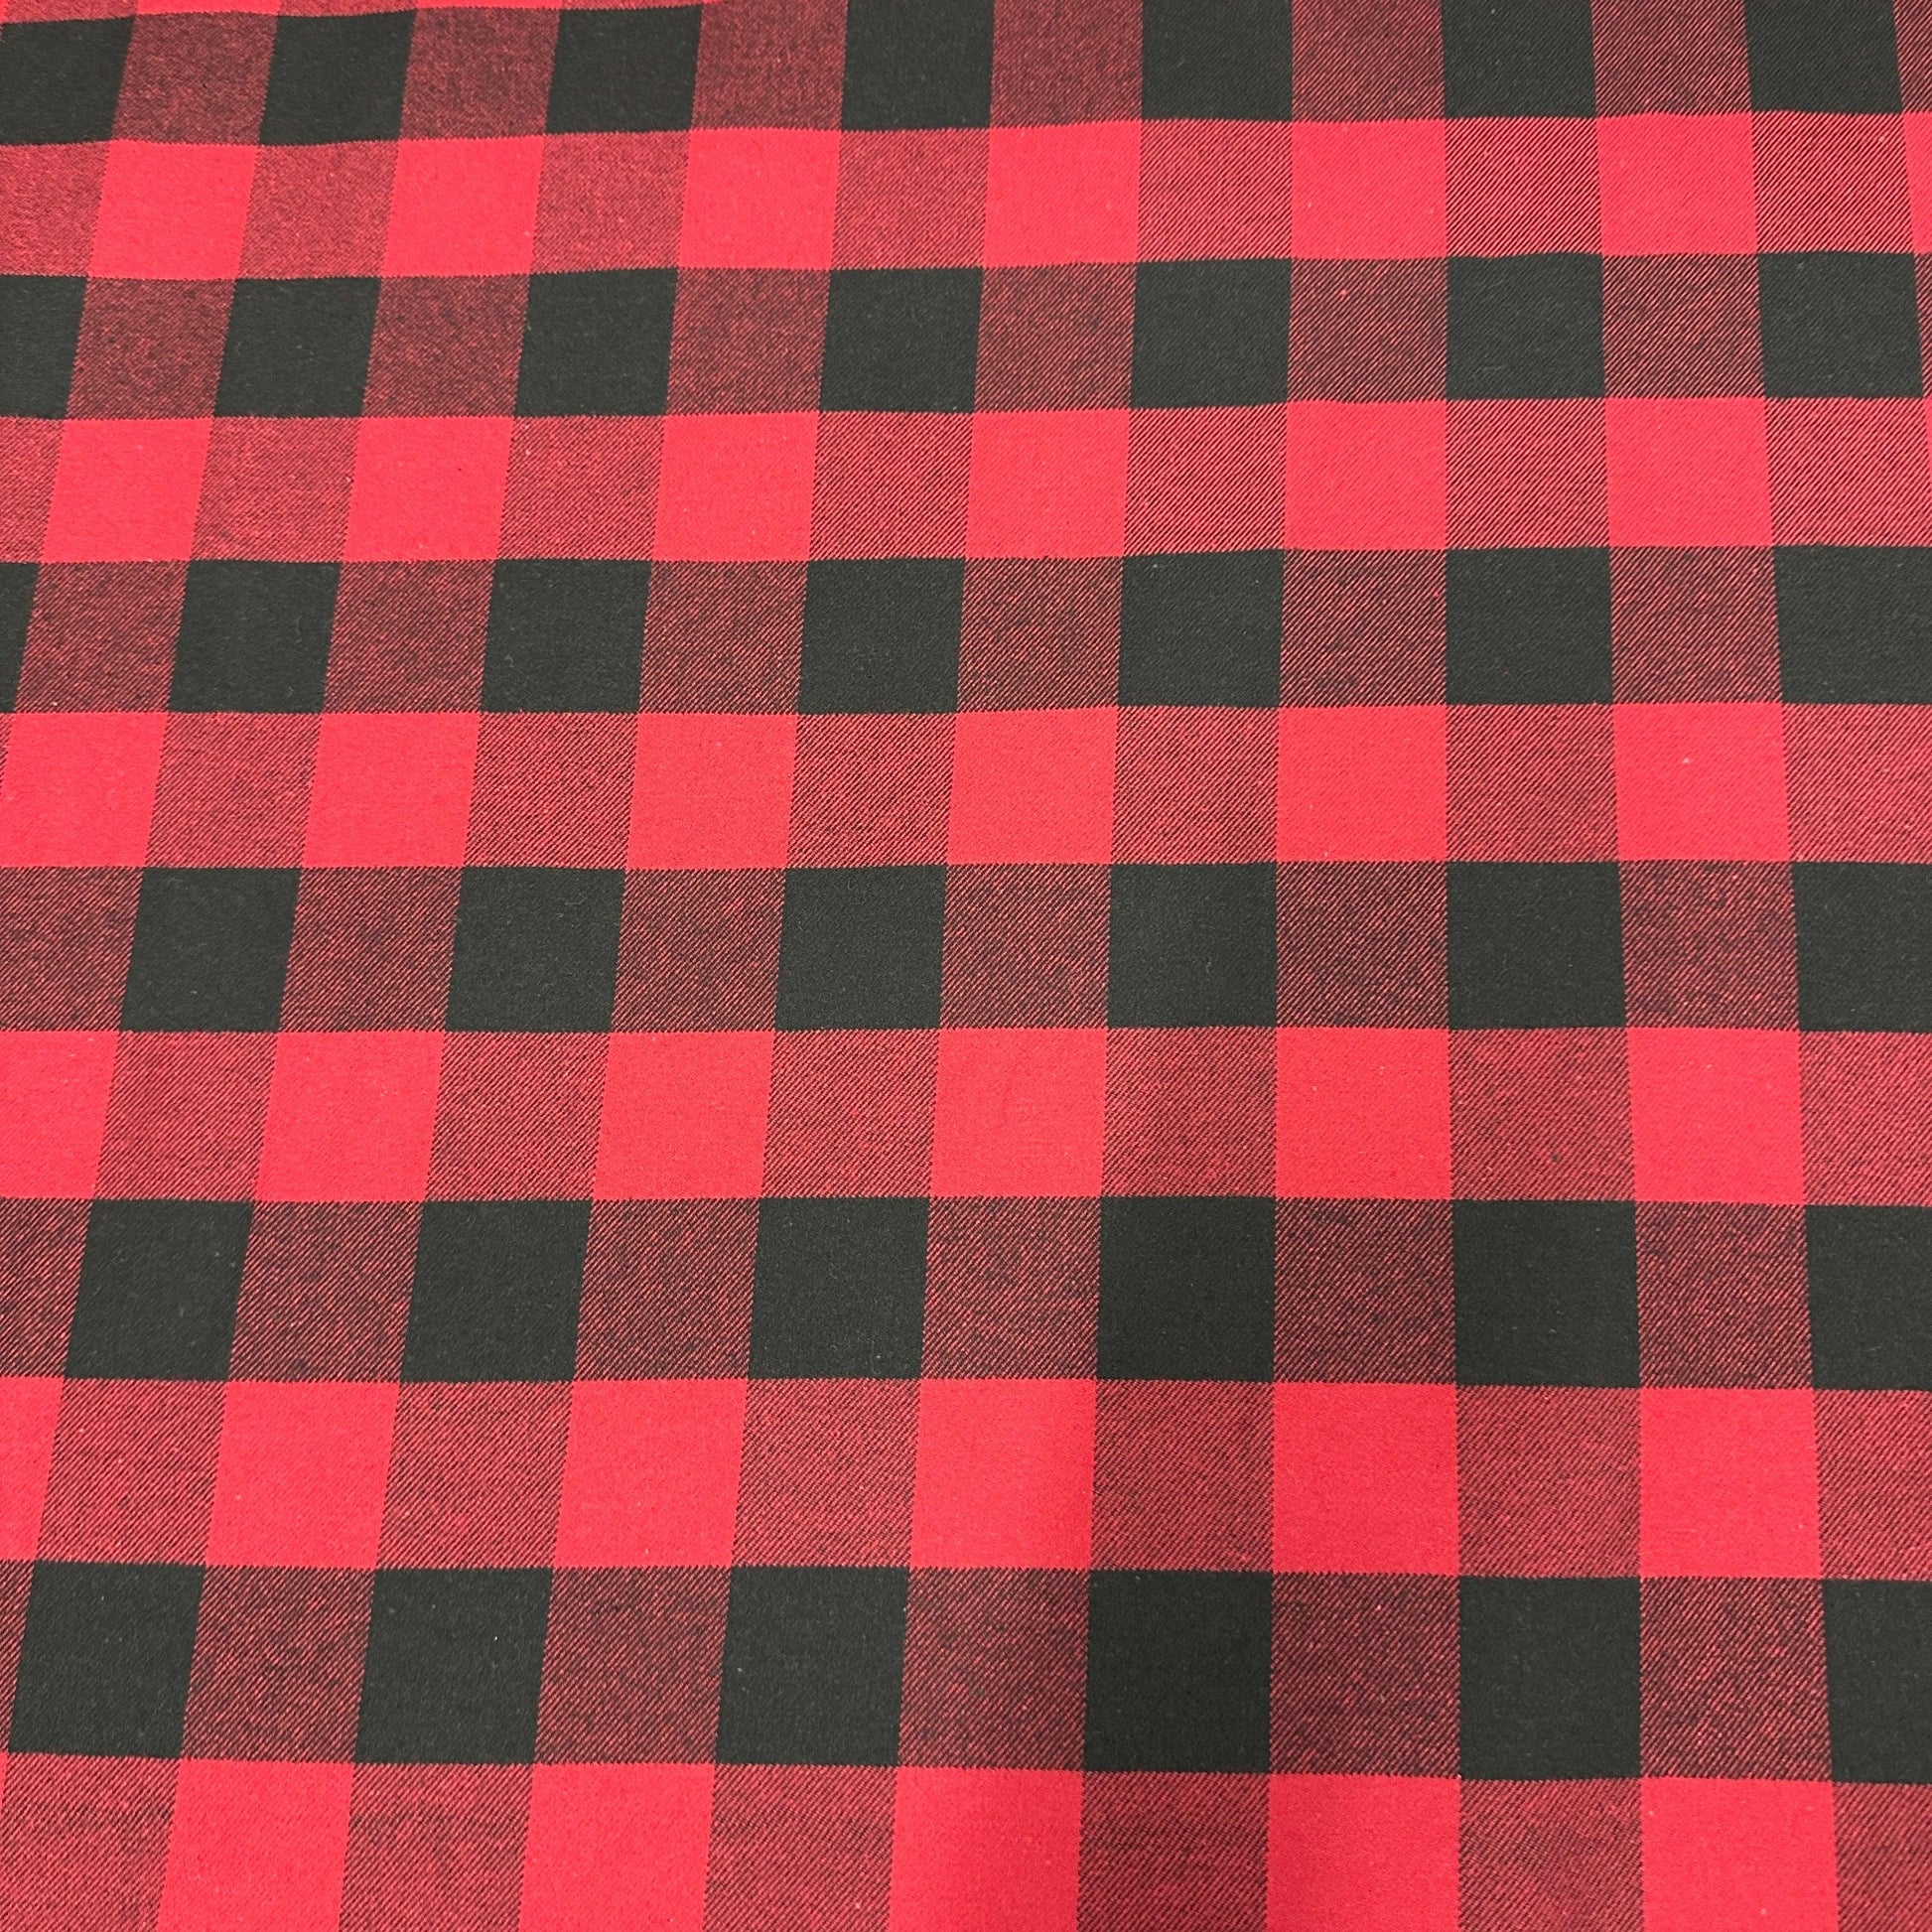 Red and Black Plaid Cotton Flannel Fabric - Nature's Fabrics